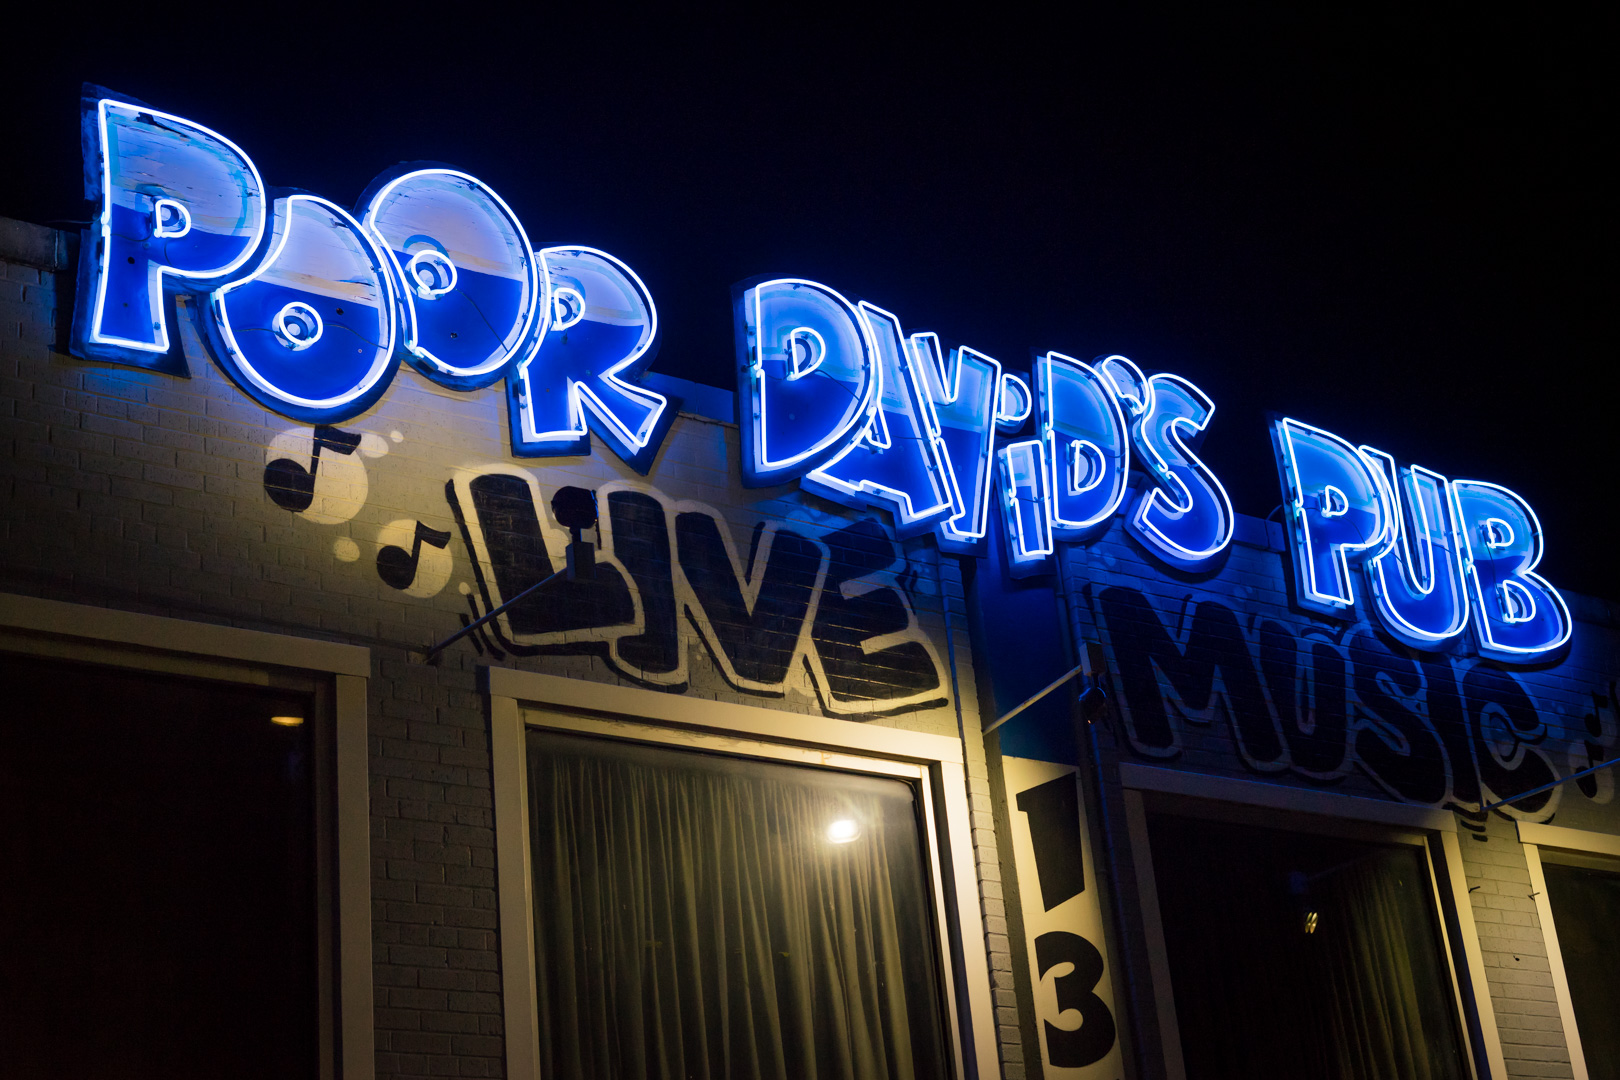 A front face of a venue with neon sign "Poor David's Pub"